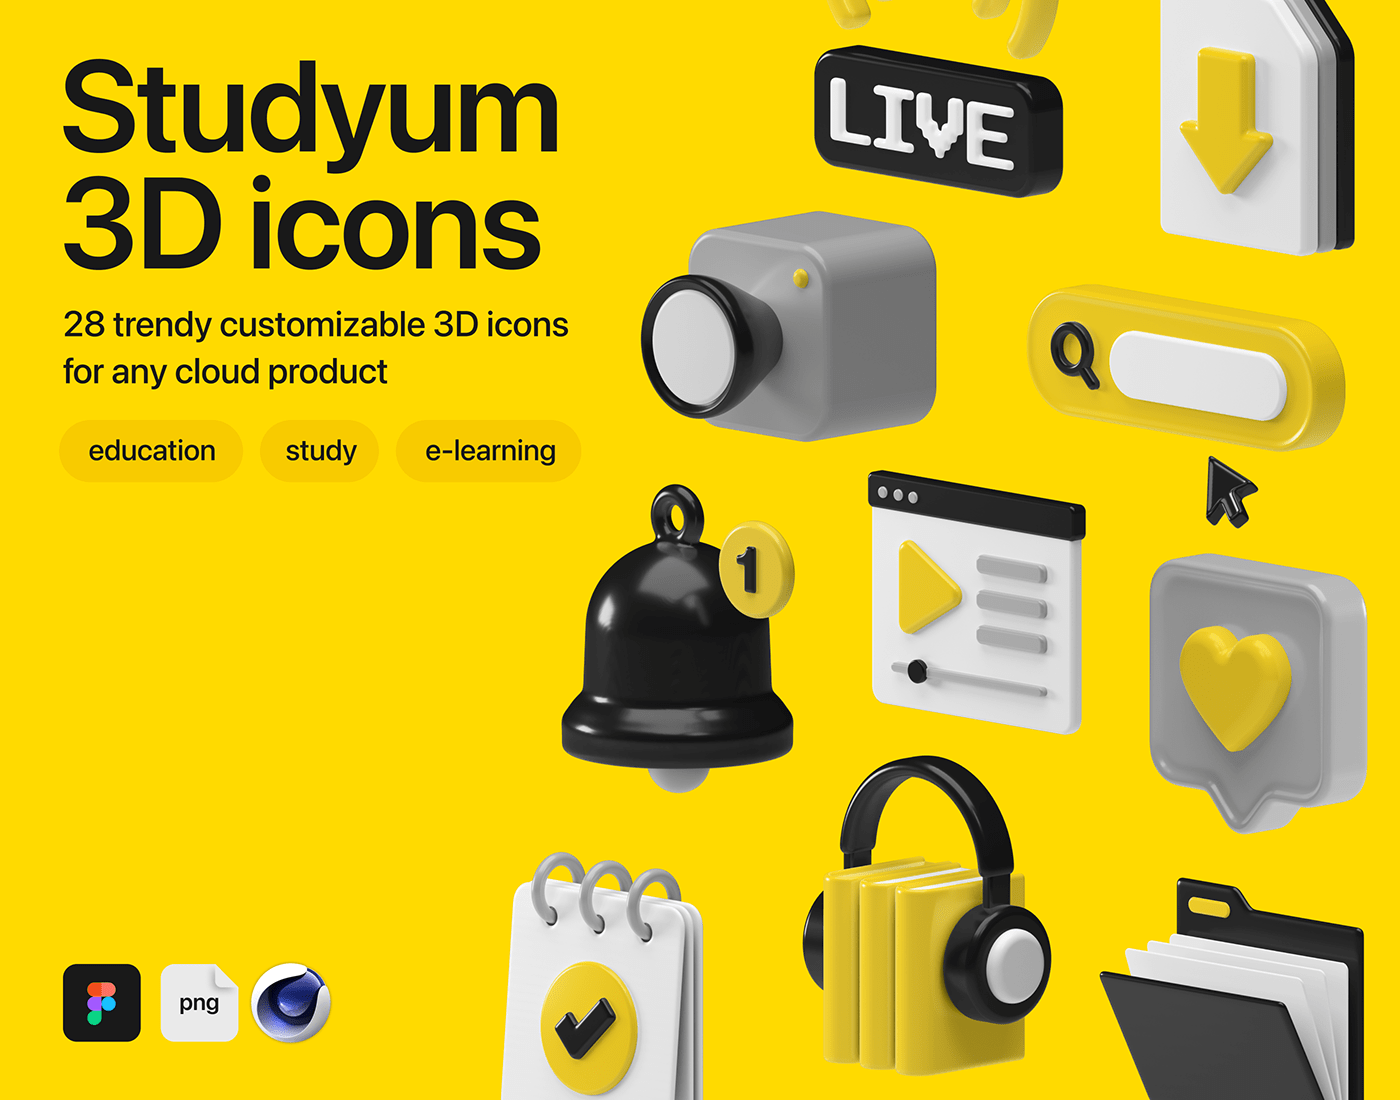 3d icons 3D illustration cinema 4d design tools e-learning Education free Online education study